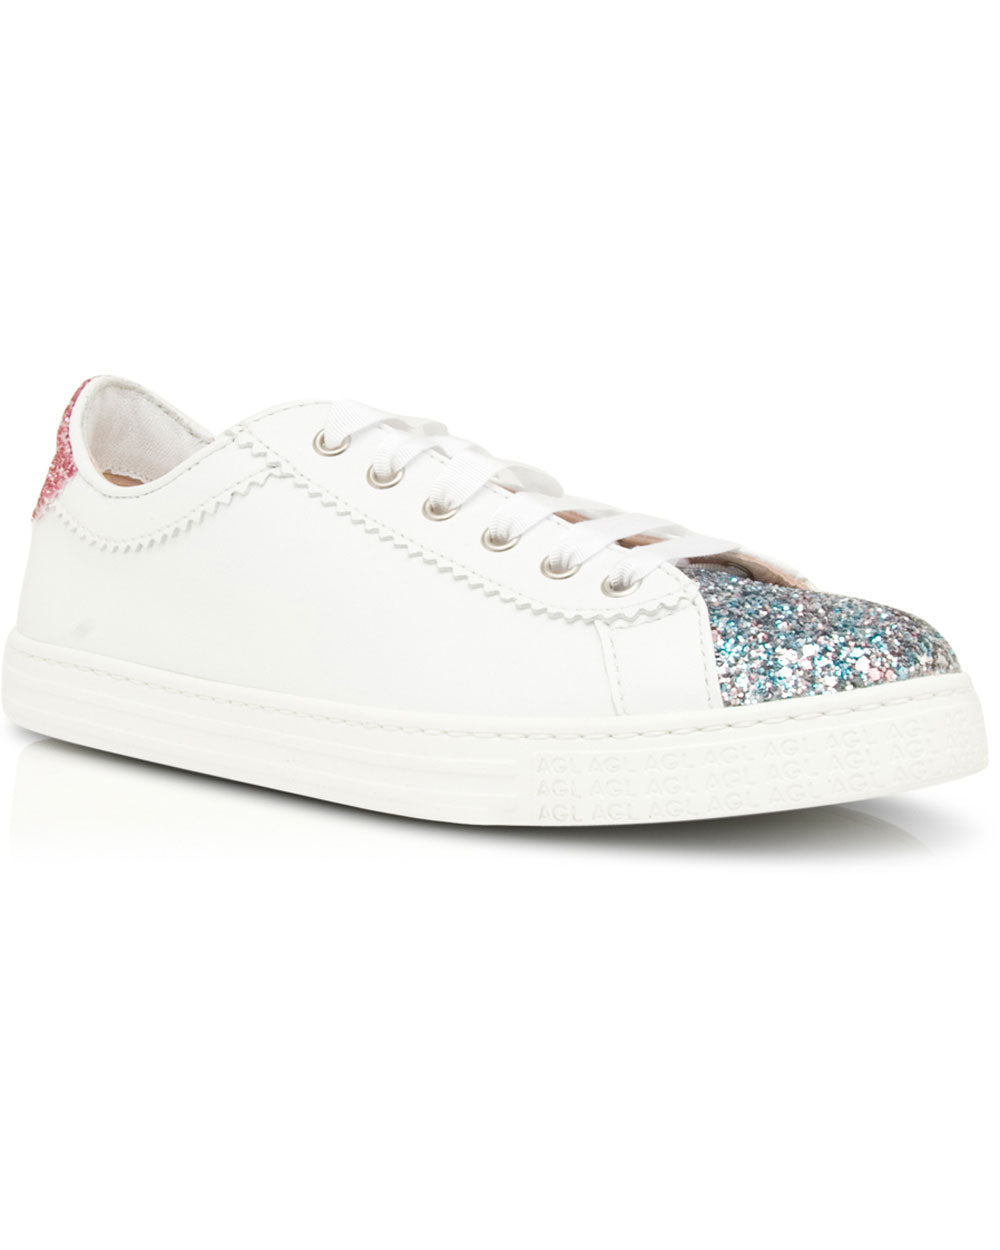 Sade Glitter Sneaker in Carbon and Pink